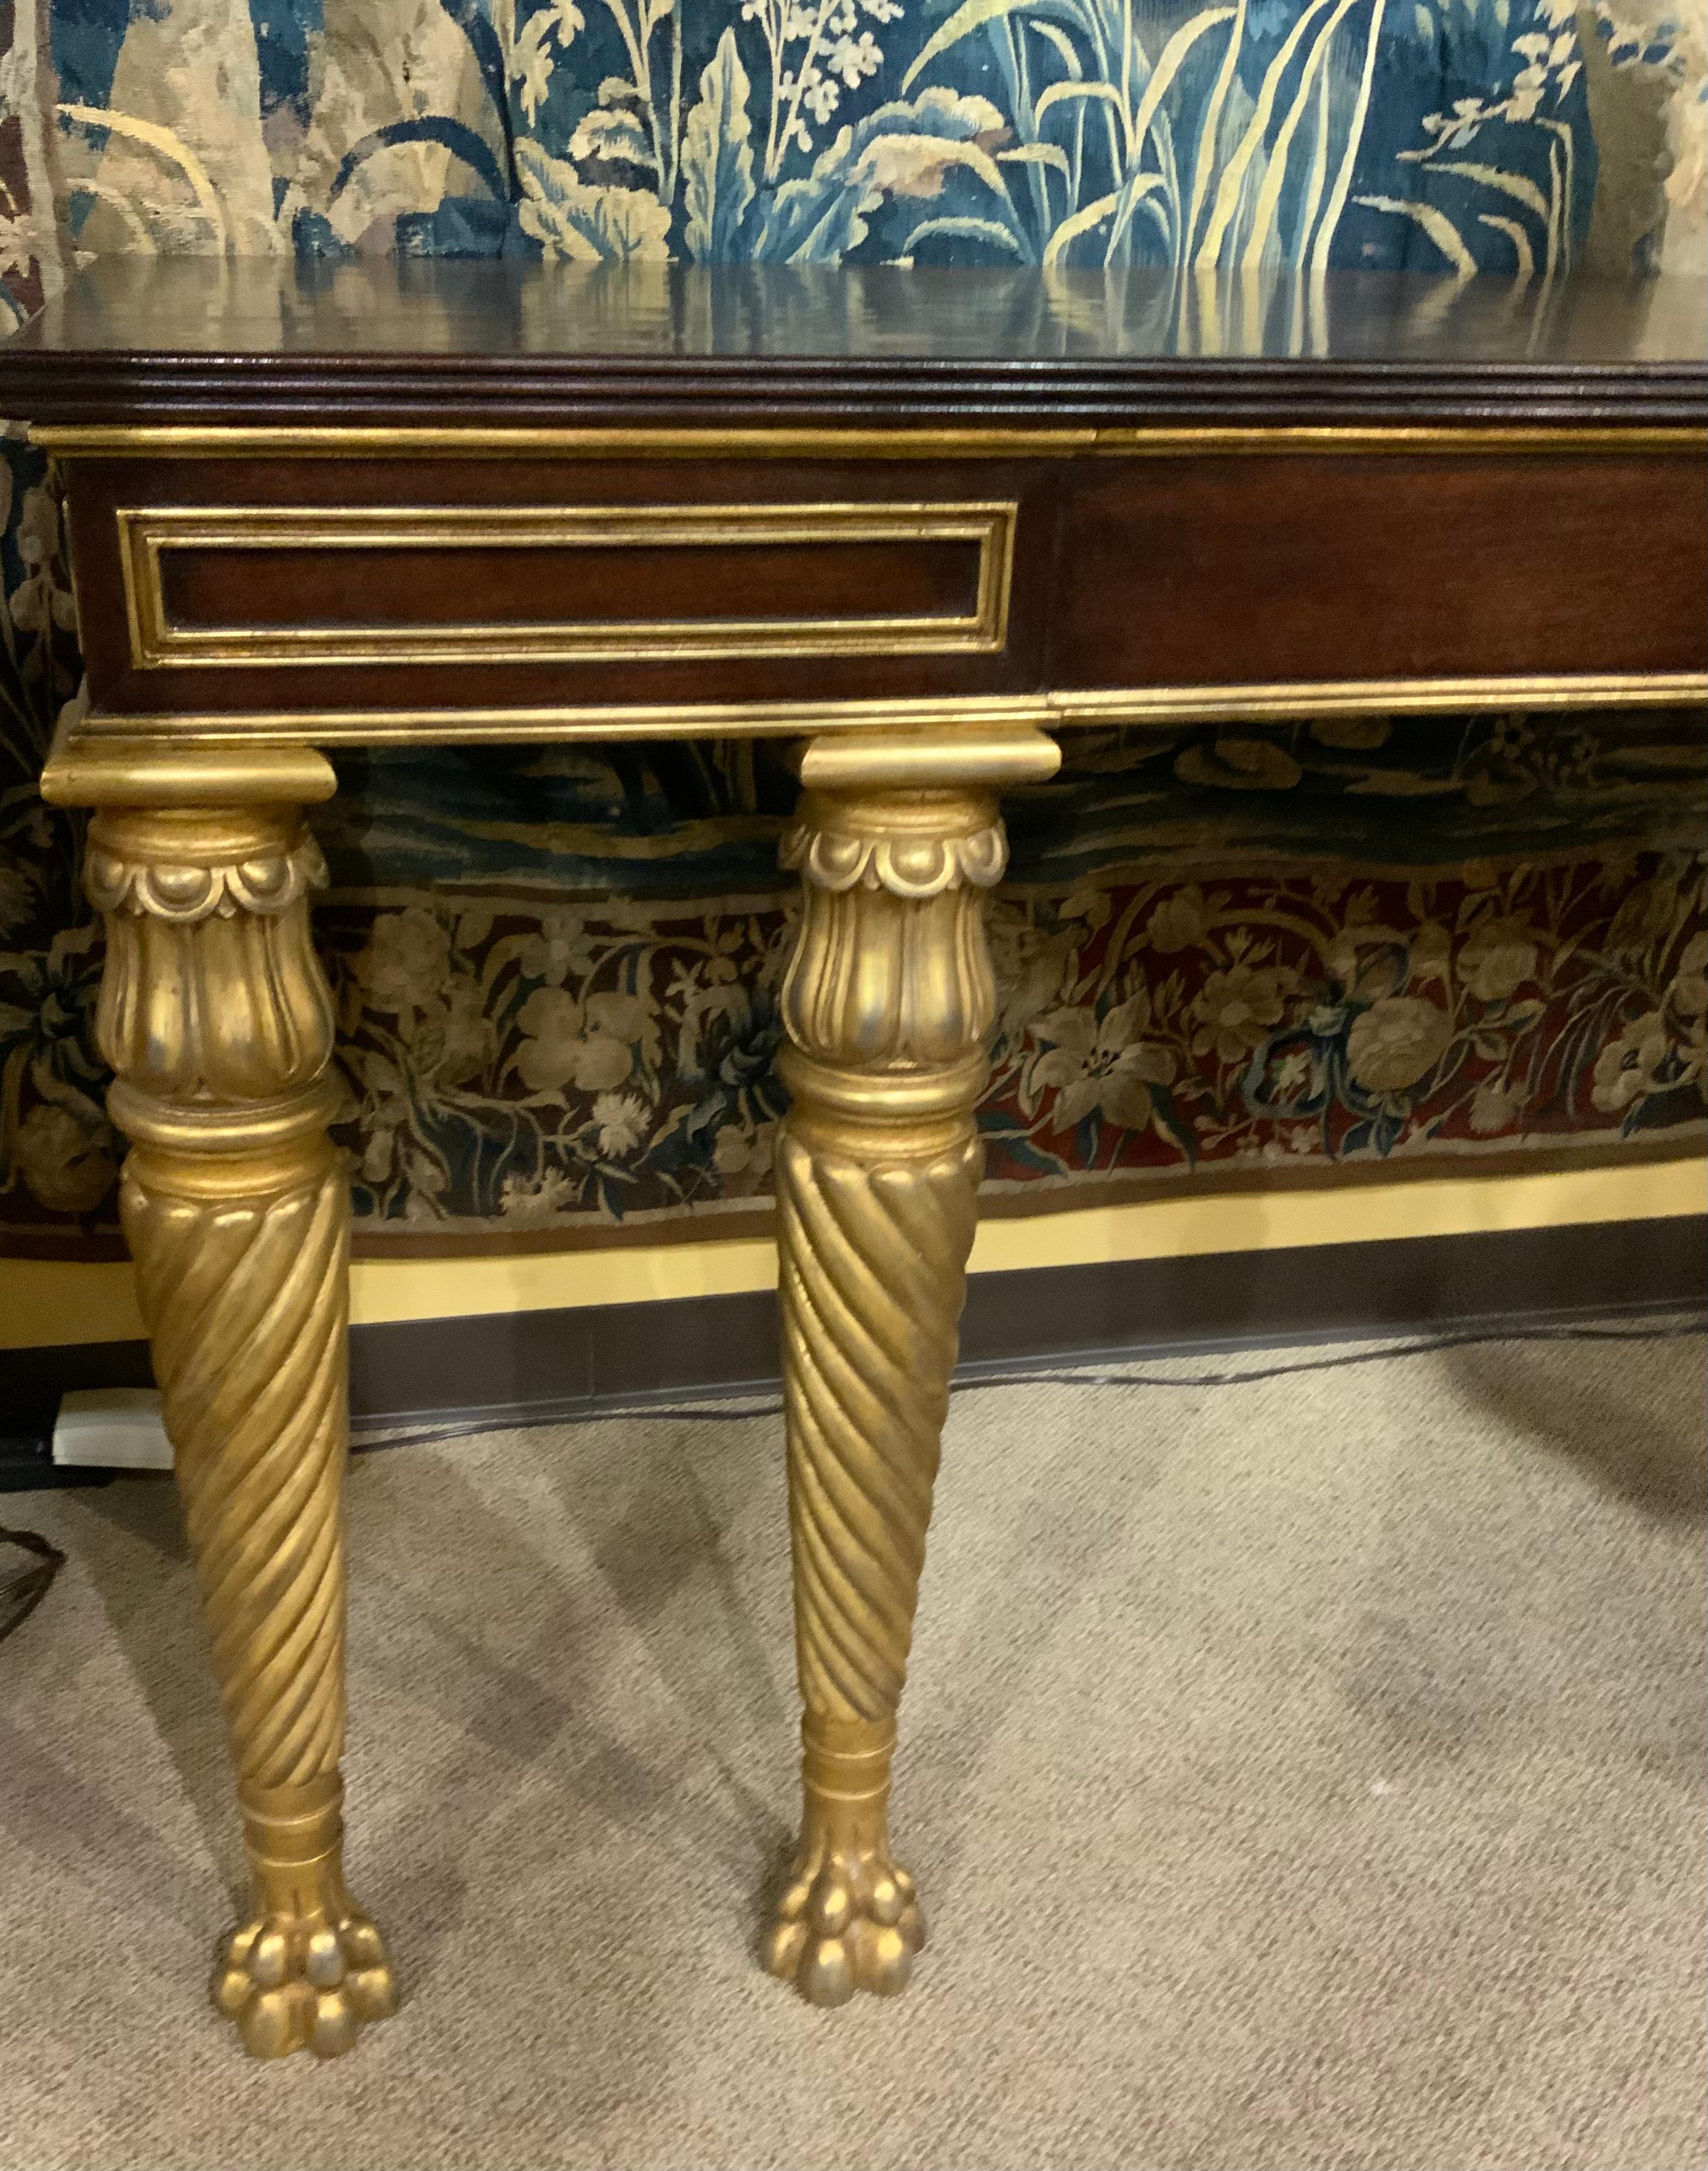 Mahogany Console with Gilt Carved Legs and Designs in Neoclassical Taste For Sale 1